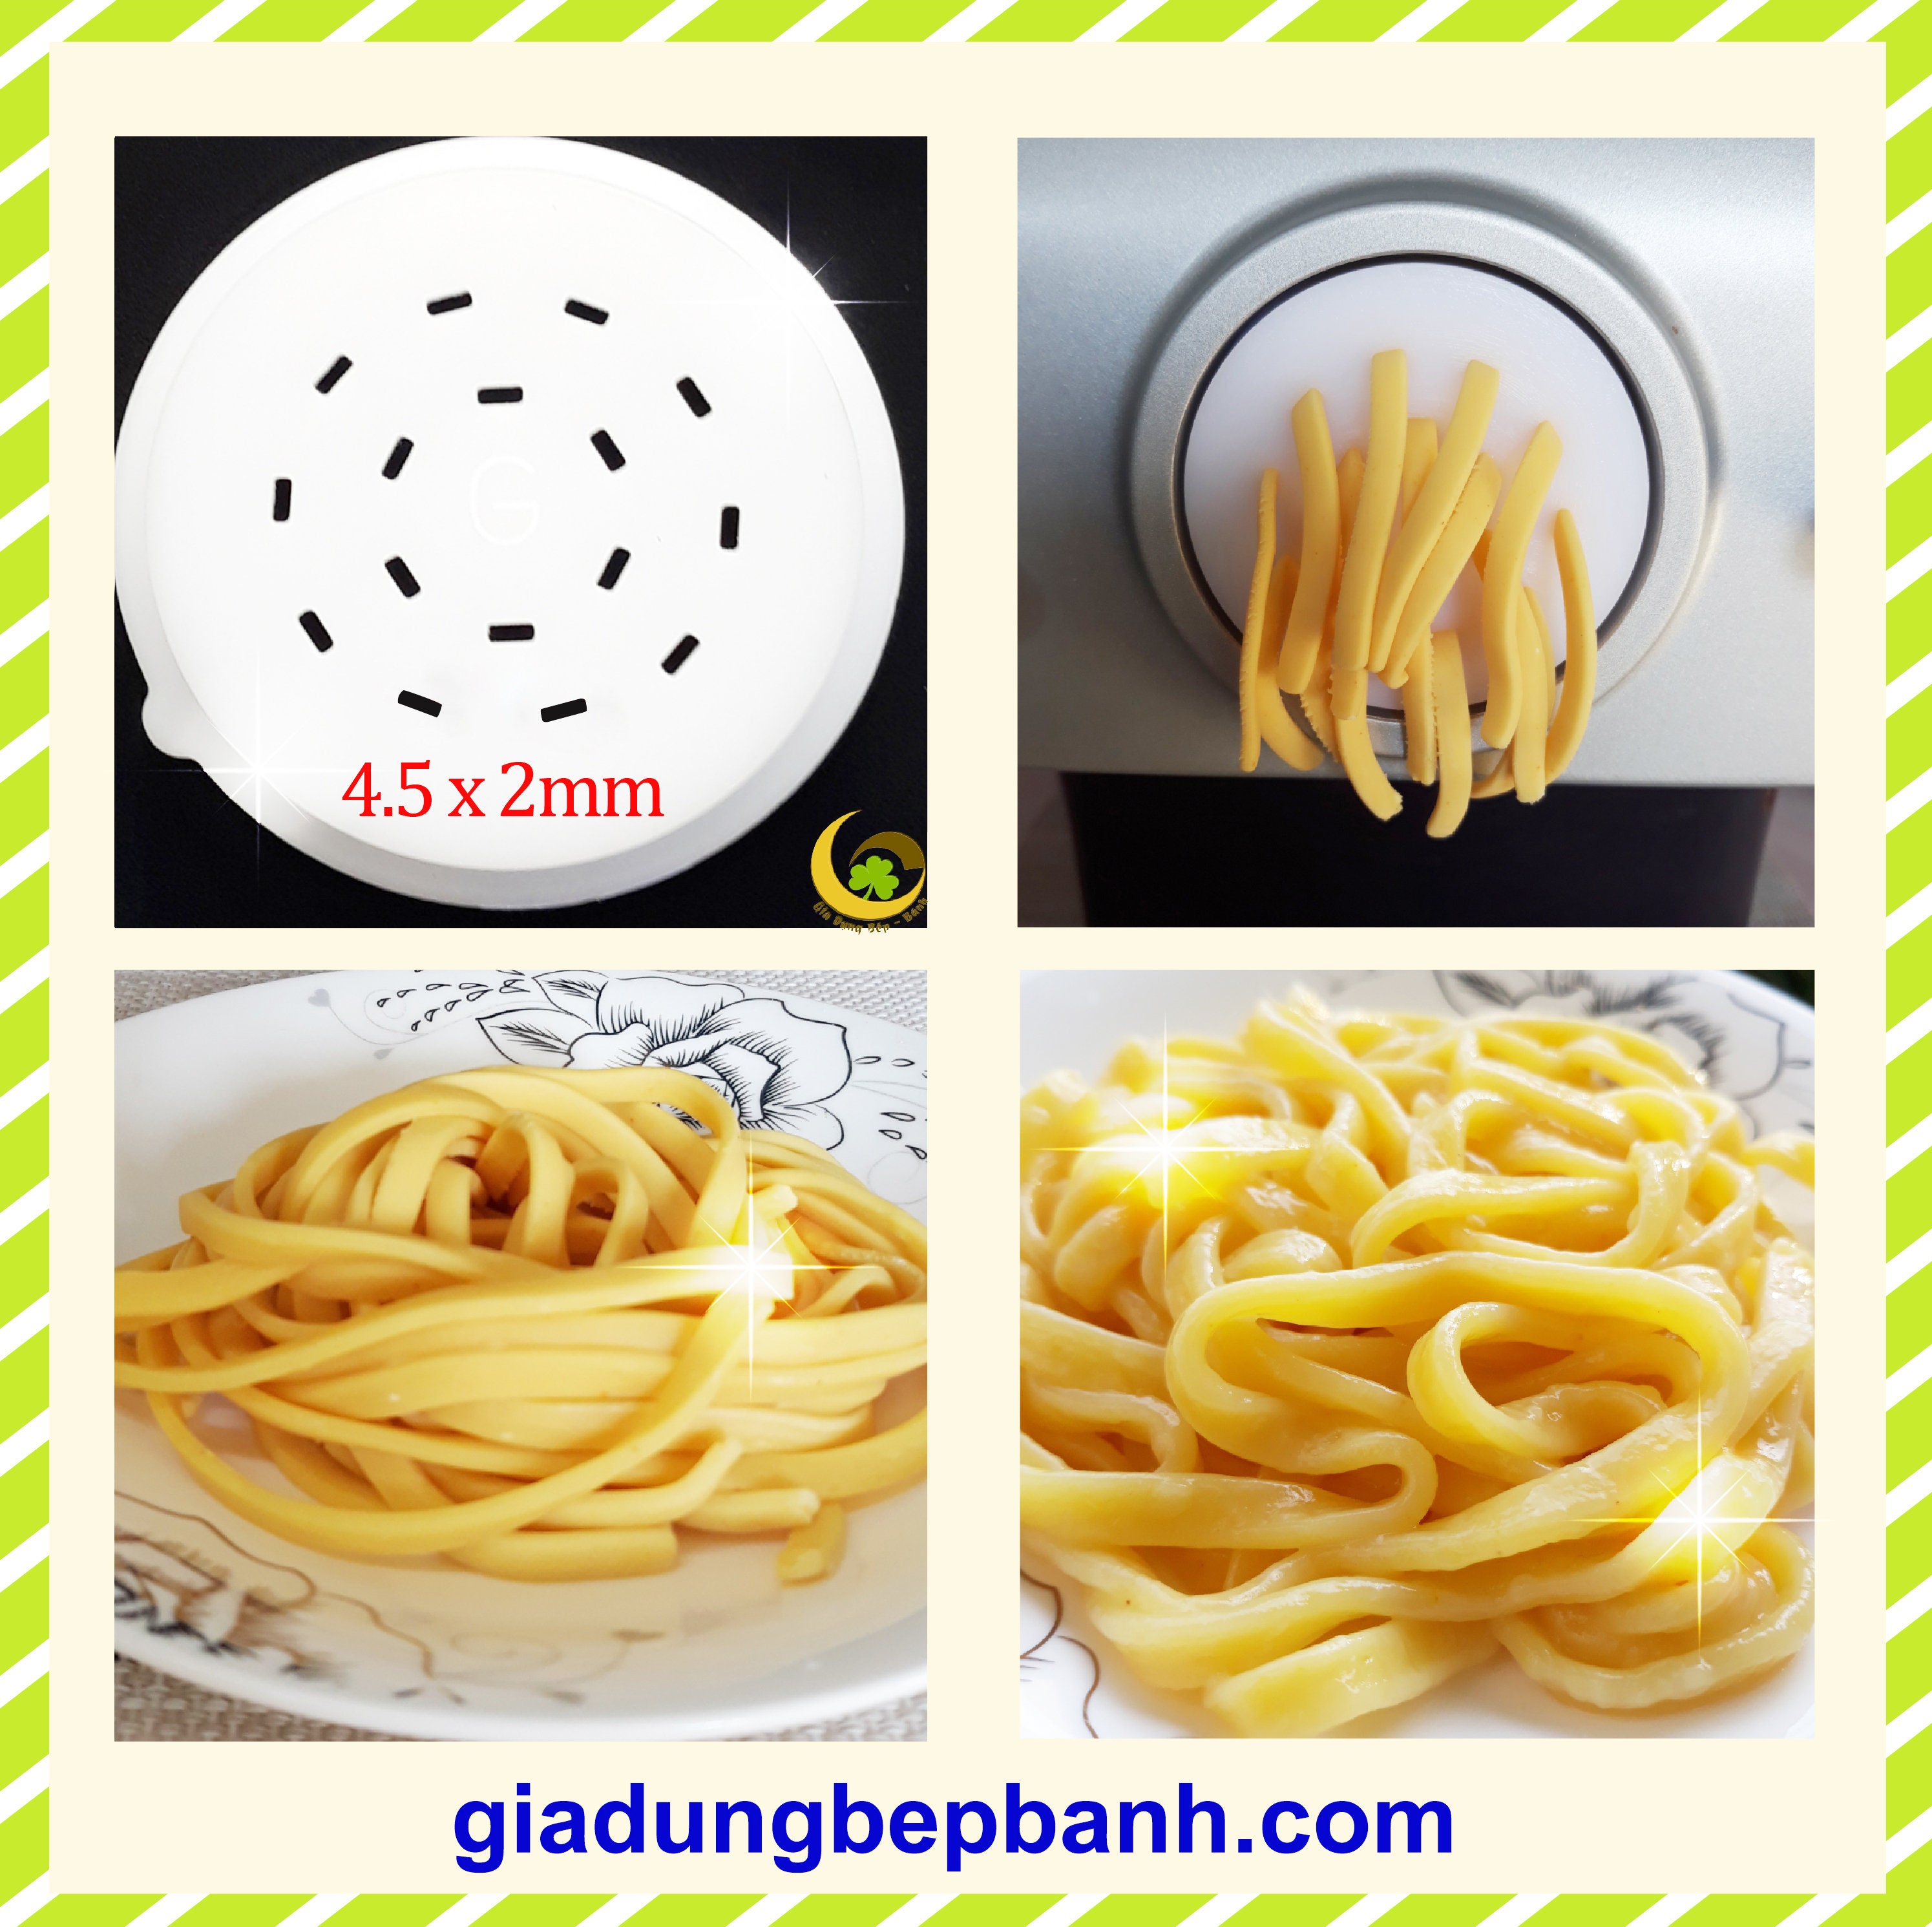 Grote waanidee grond Erfgenaam Philips Pasta Disc Udon/bánh Canh Xắt - Etsy